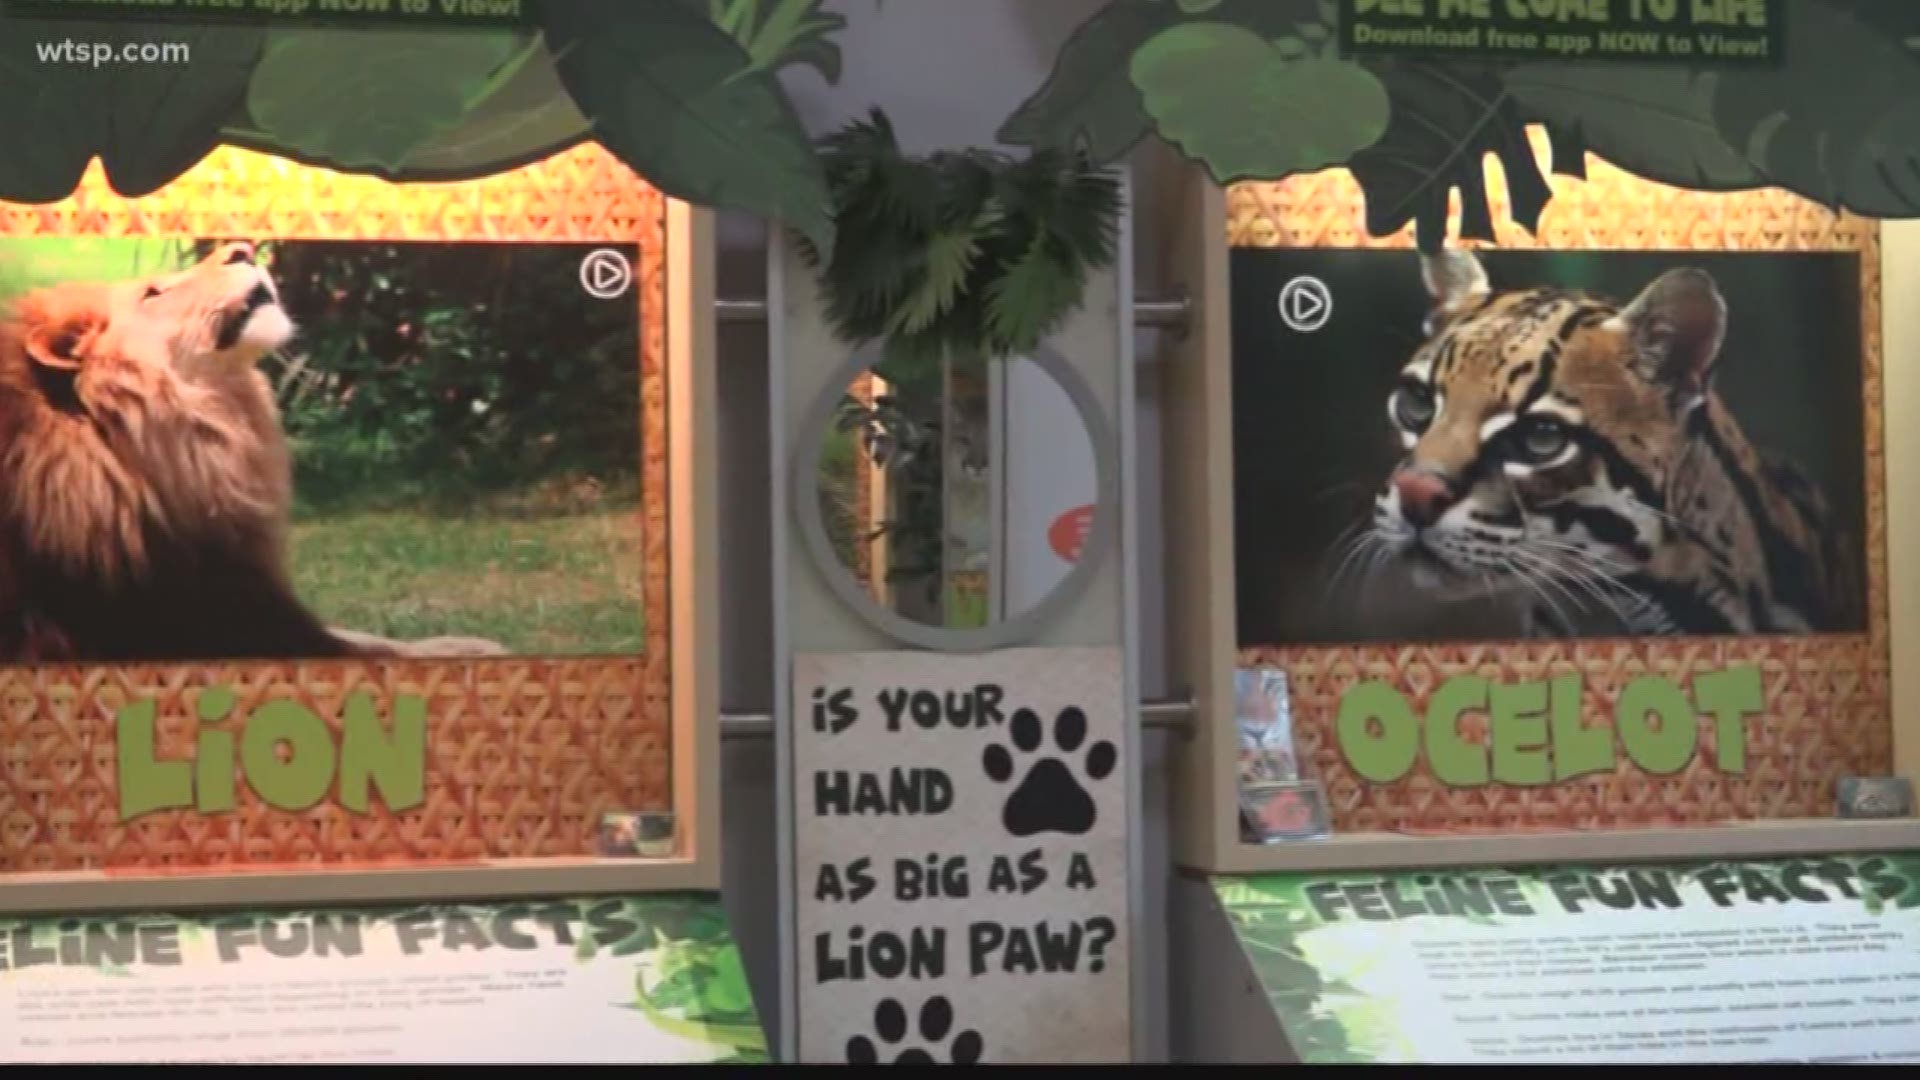 Tampa Bay's first augmented reality zoo opens in North Tampa

The concept is simple: when you go to the Big Cat Rescue AR ZOO in North Tampa, you download an app on your phone to scan a photo or poster and then watch the animals come to life. https://on.wtsp.com/2OVhArx